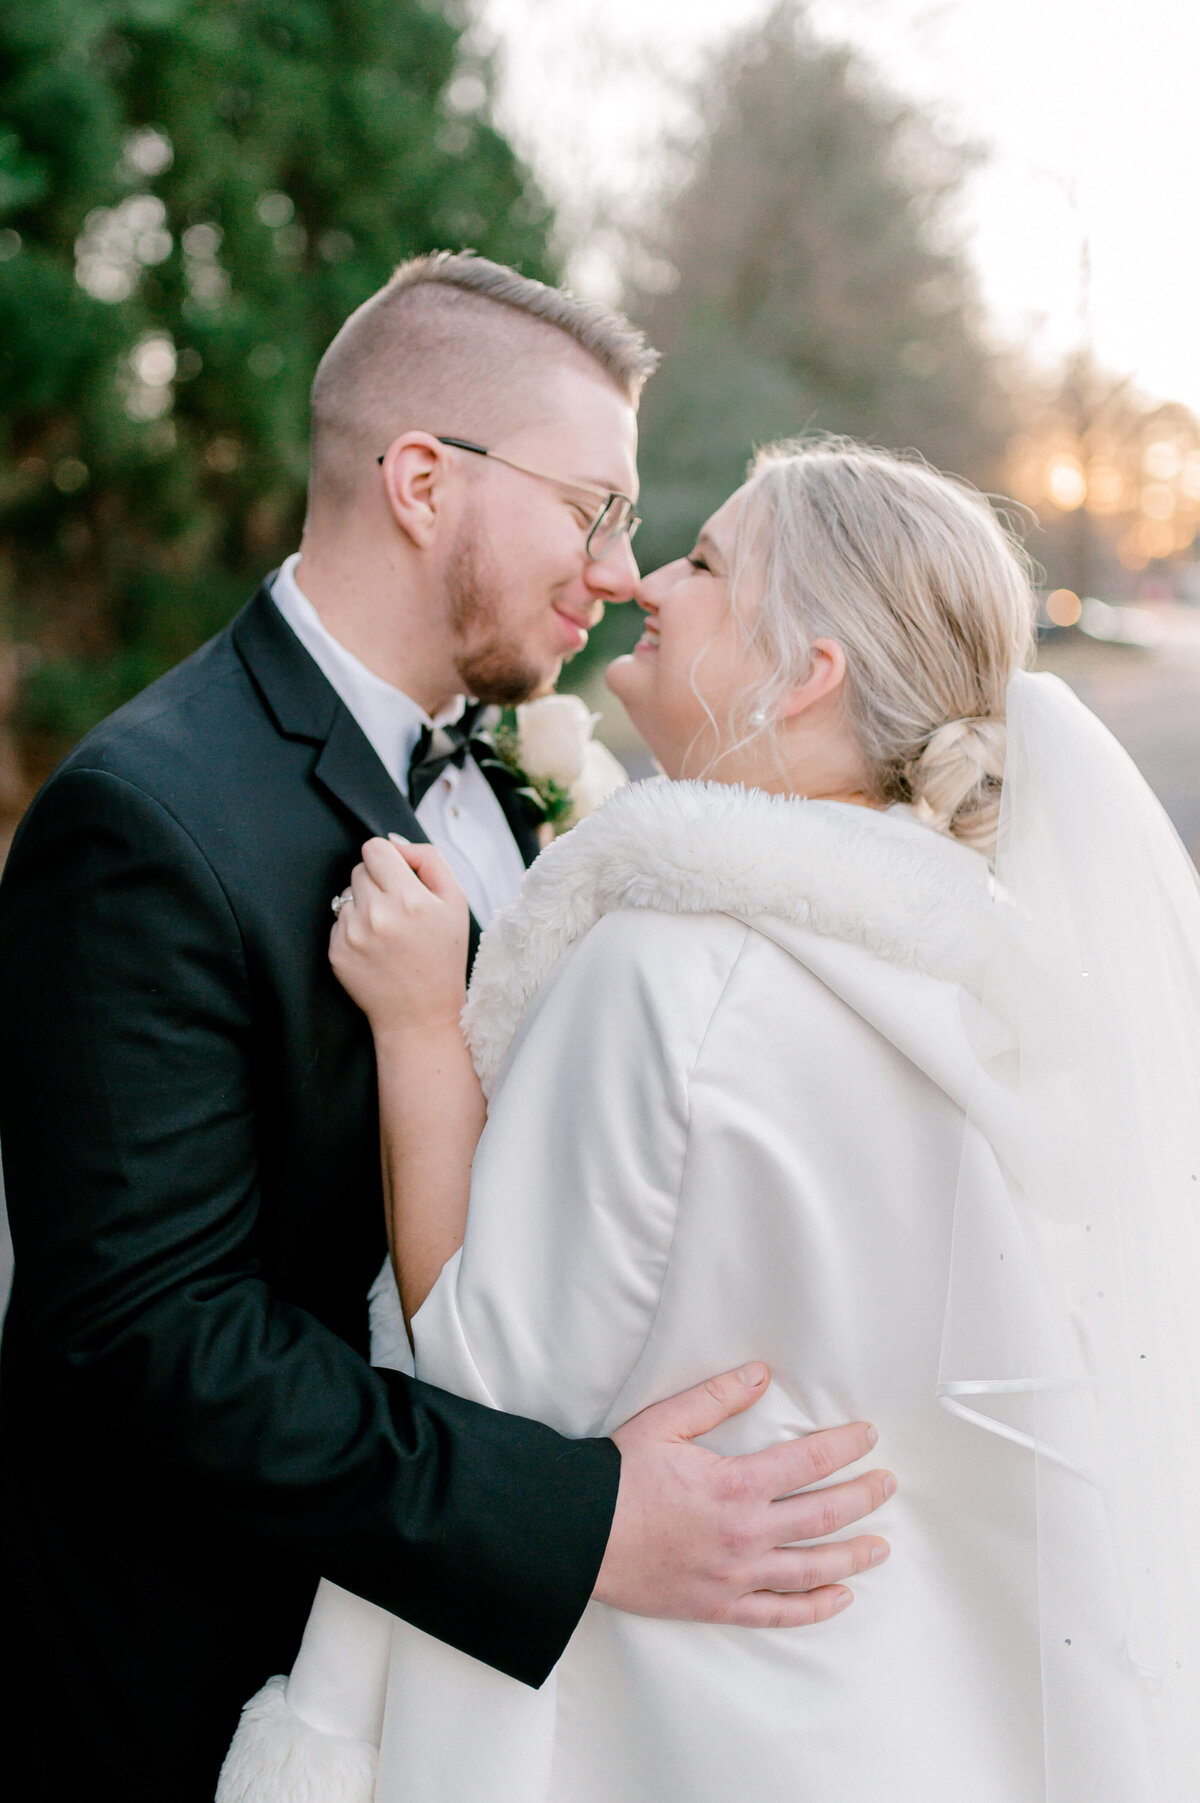 Romantic portrait of bride and groom snuggling close during winter portraits